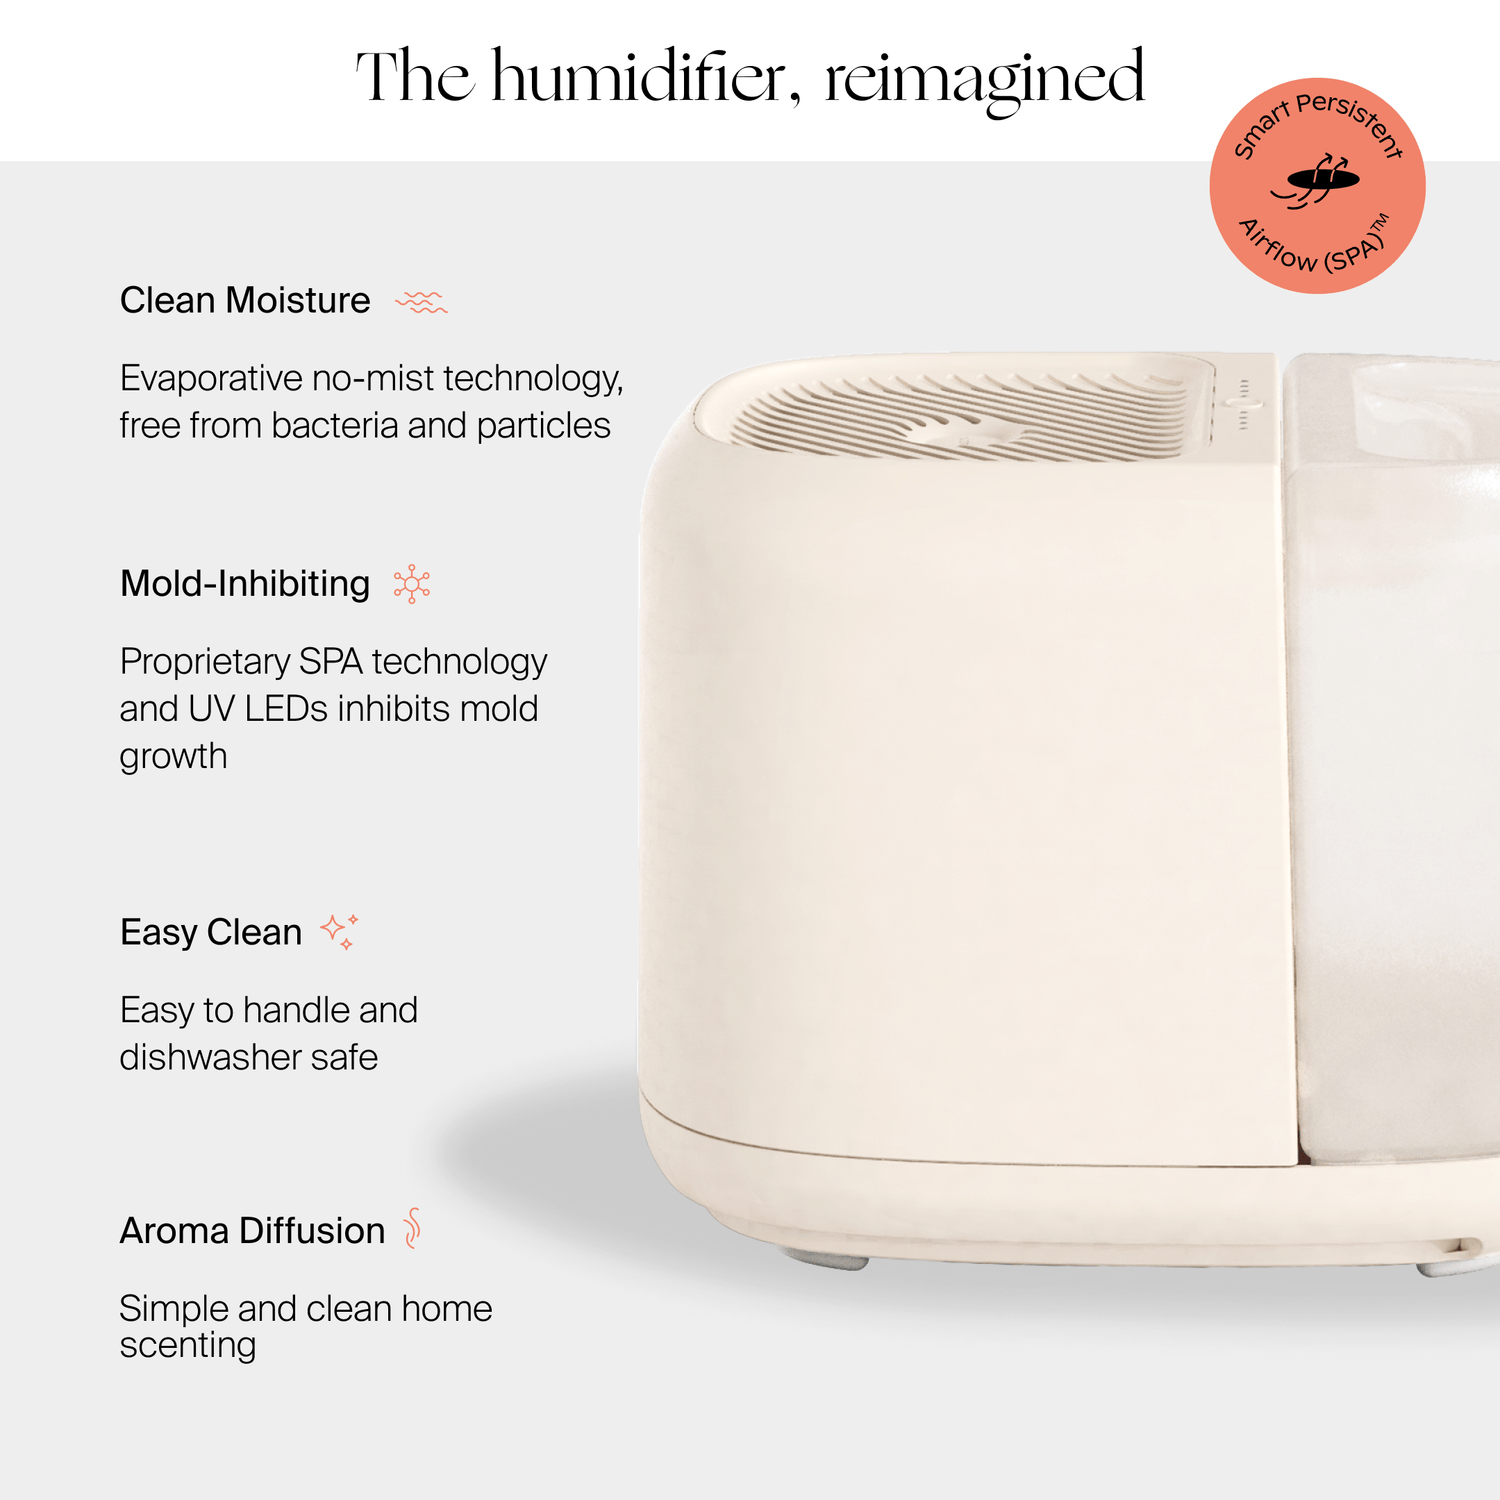 Large Room Humidifier | Lifestyle, the humidifier, reimagined